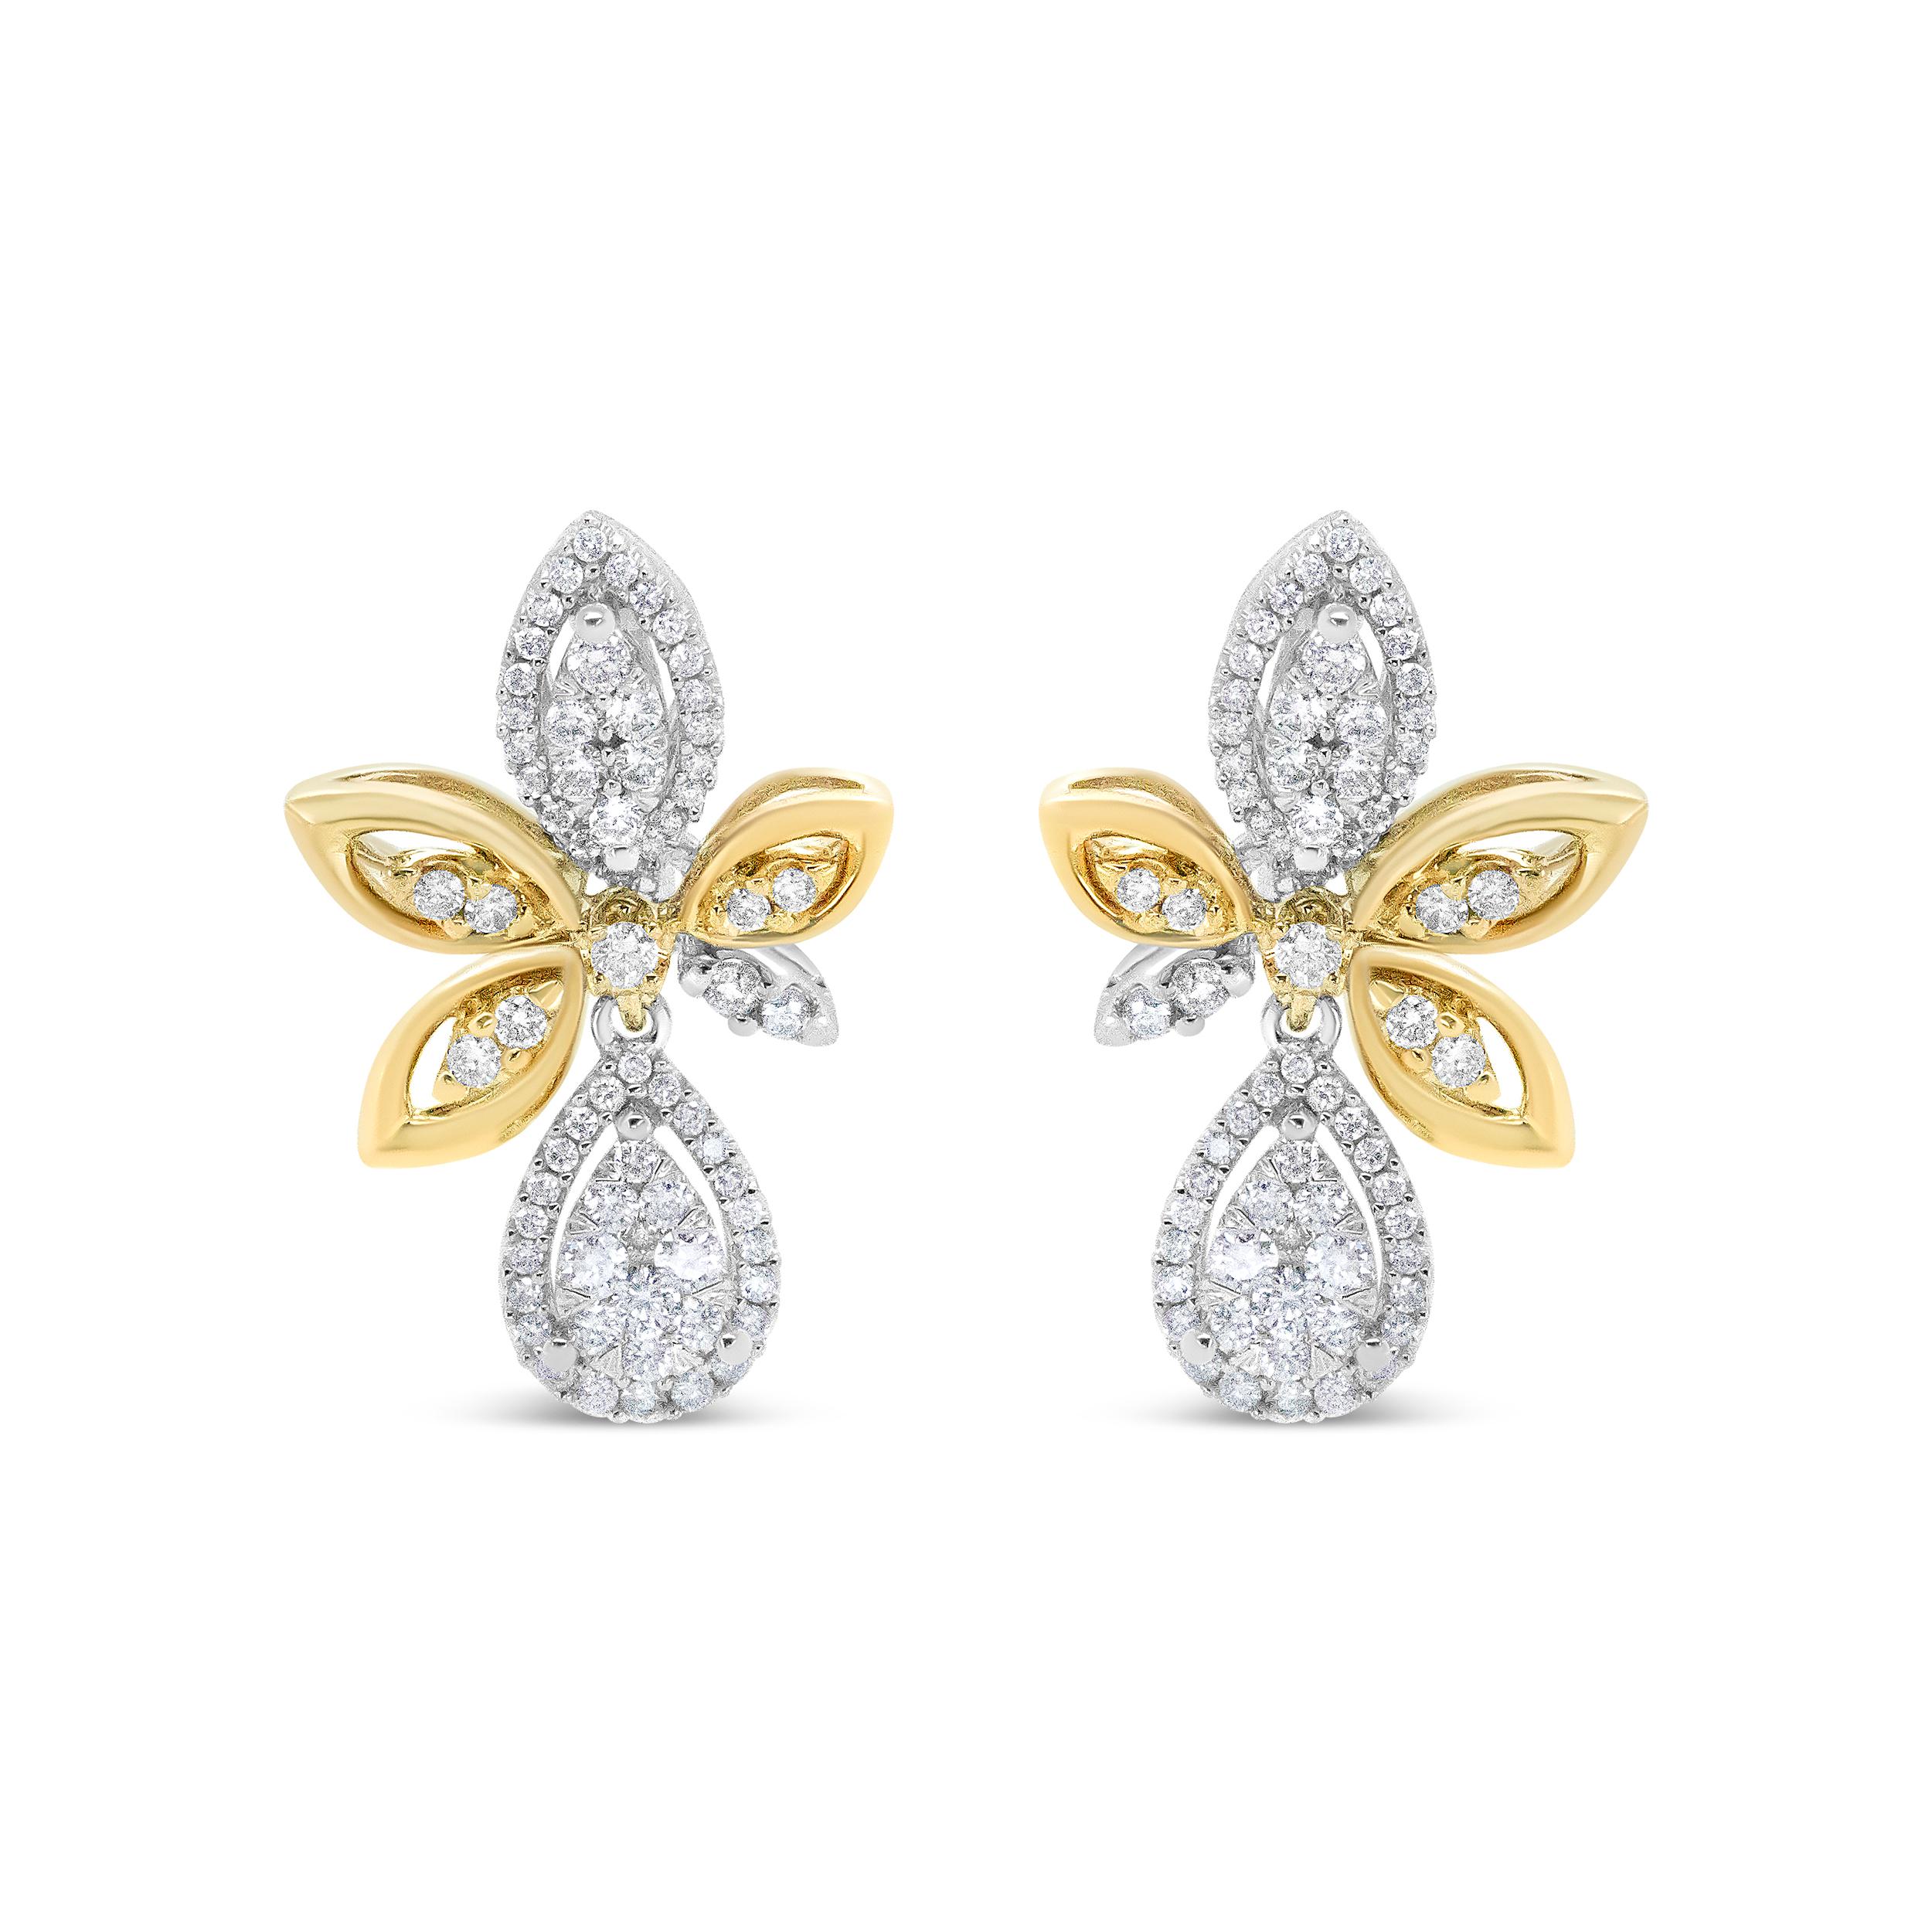 This dream-like pair of drop dangle earrings exudes total luxury, drenched in the brilliance of 140 round white diamonds in glorious pave settings. These sparkling diamonds total 1.00 cttw with an approximate H-I Color and SI1-SI2 Clarity. These